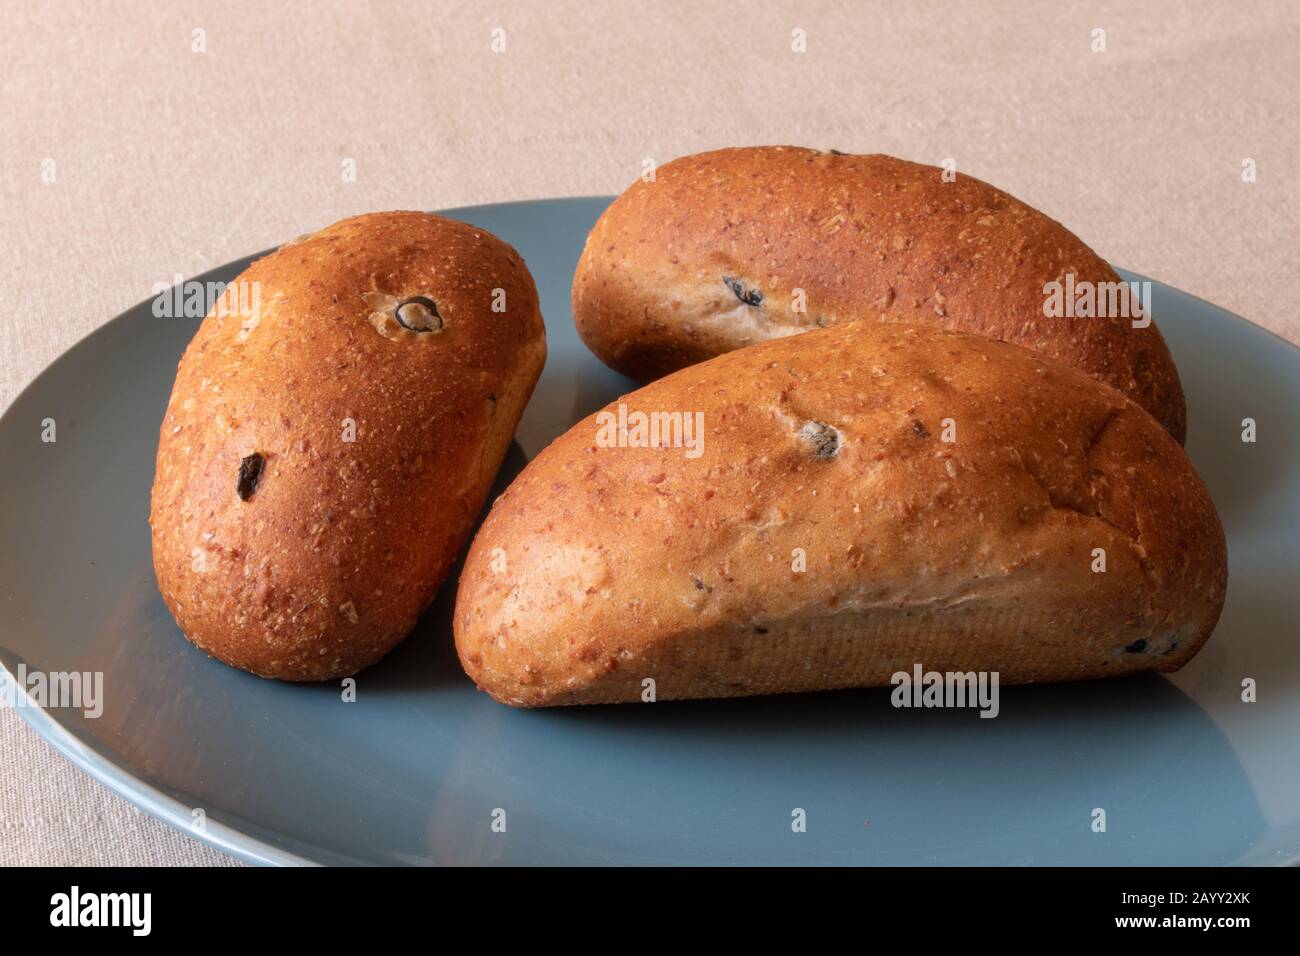 samoon bread on a plate. samoon is mainly eaten in iraq and other arab countries Stock Photo